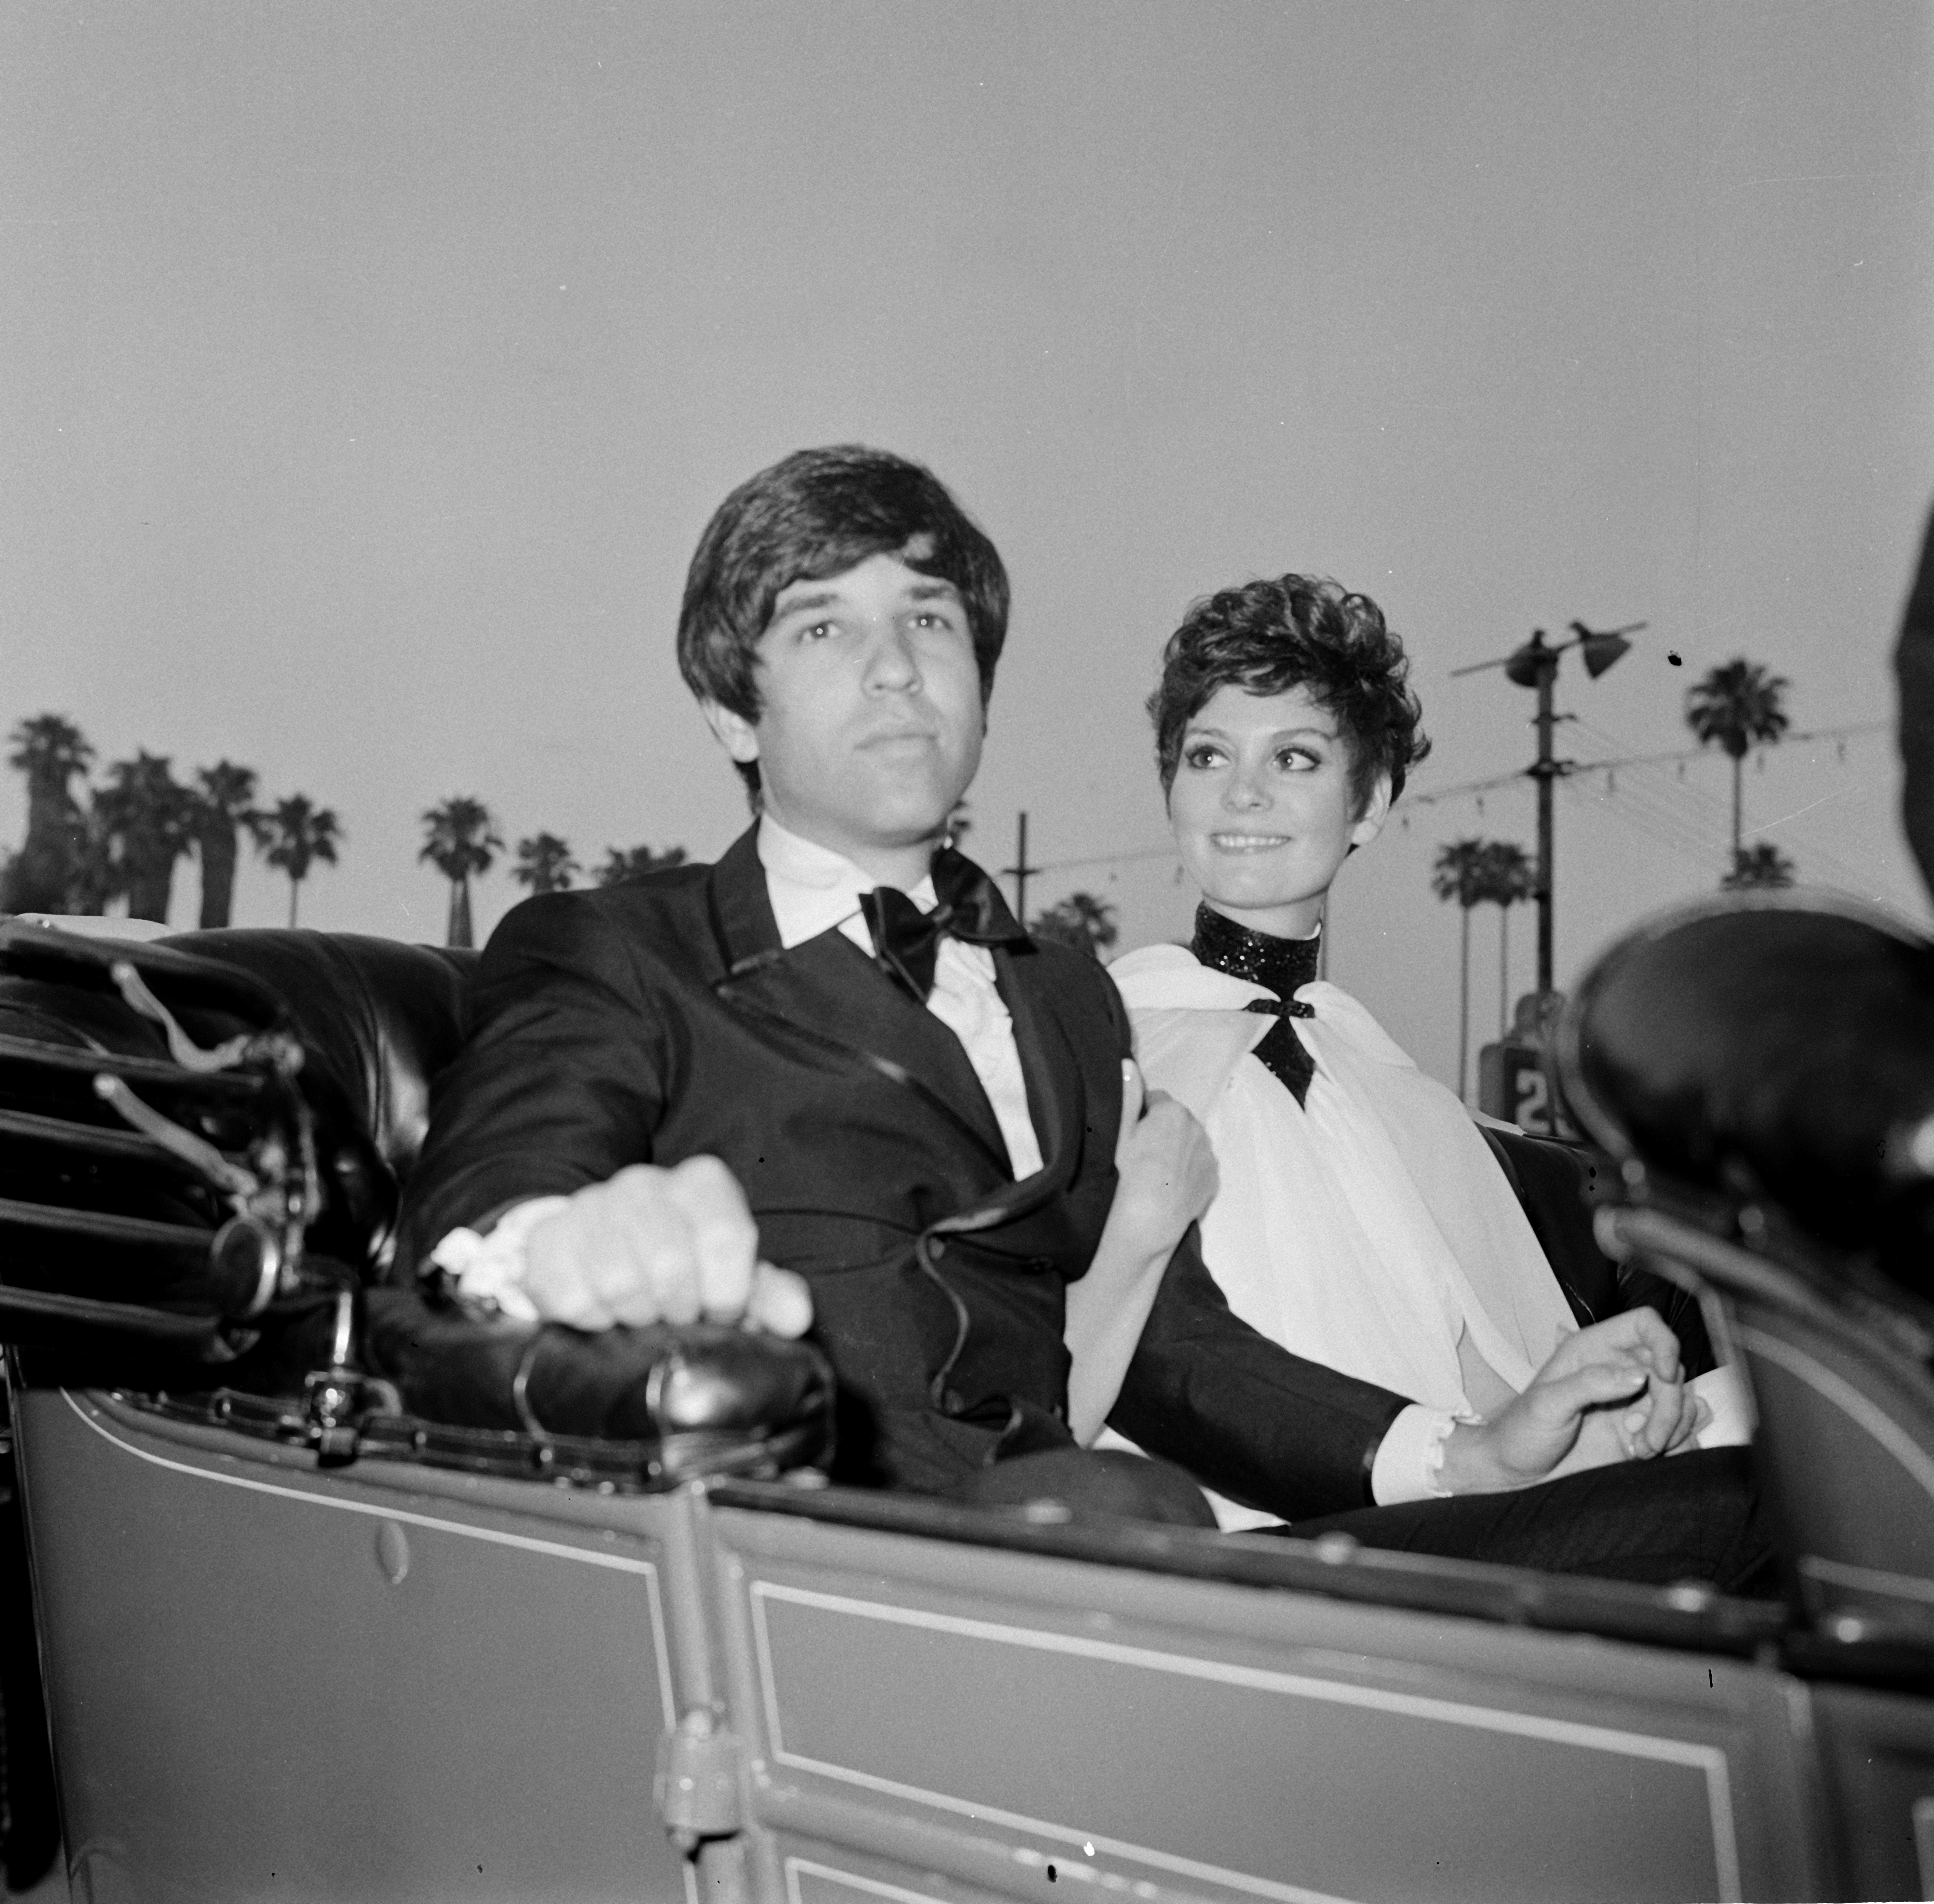 Jon Peters and Lesley Ann Warren attending an event in Los Angeles, 1966 | Source: Getty Images